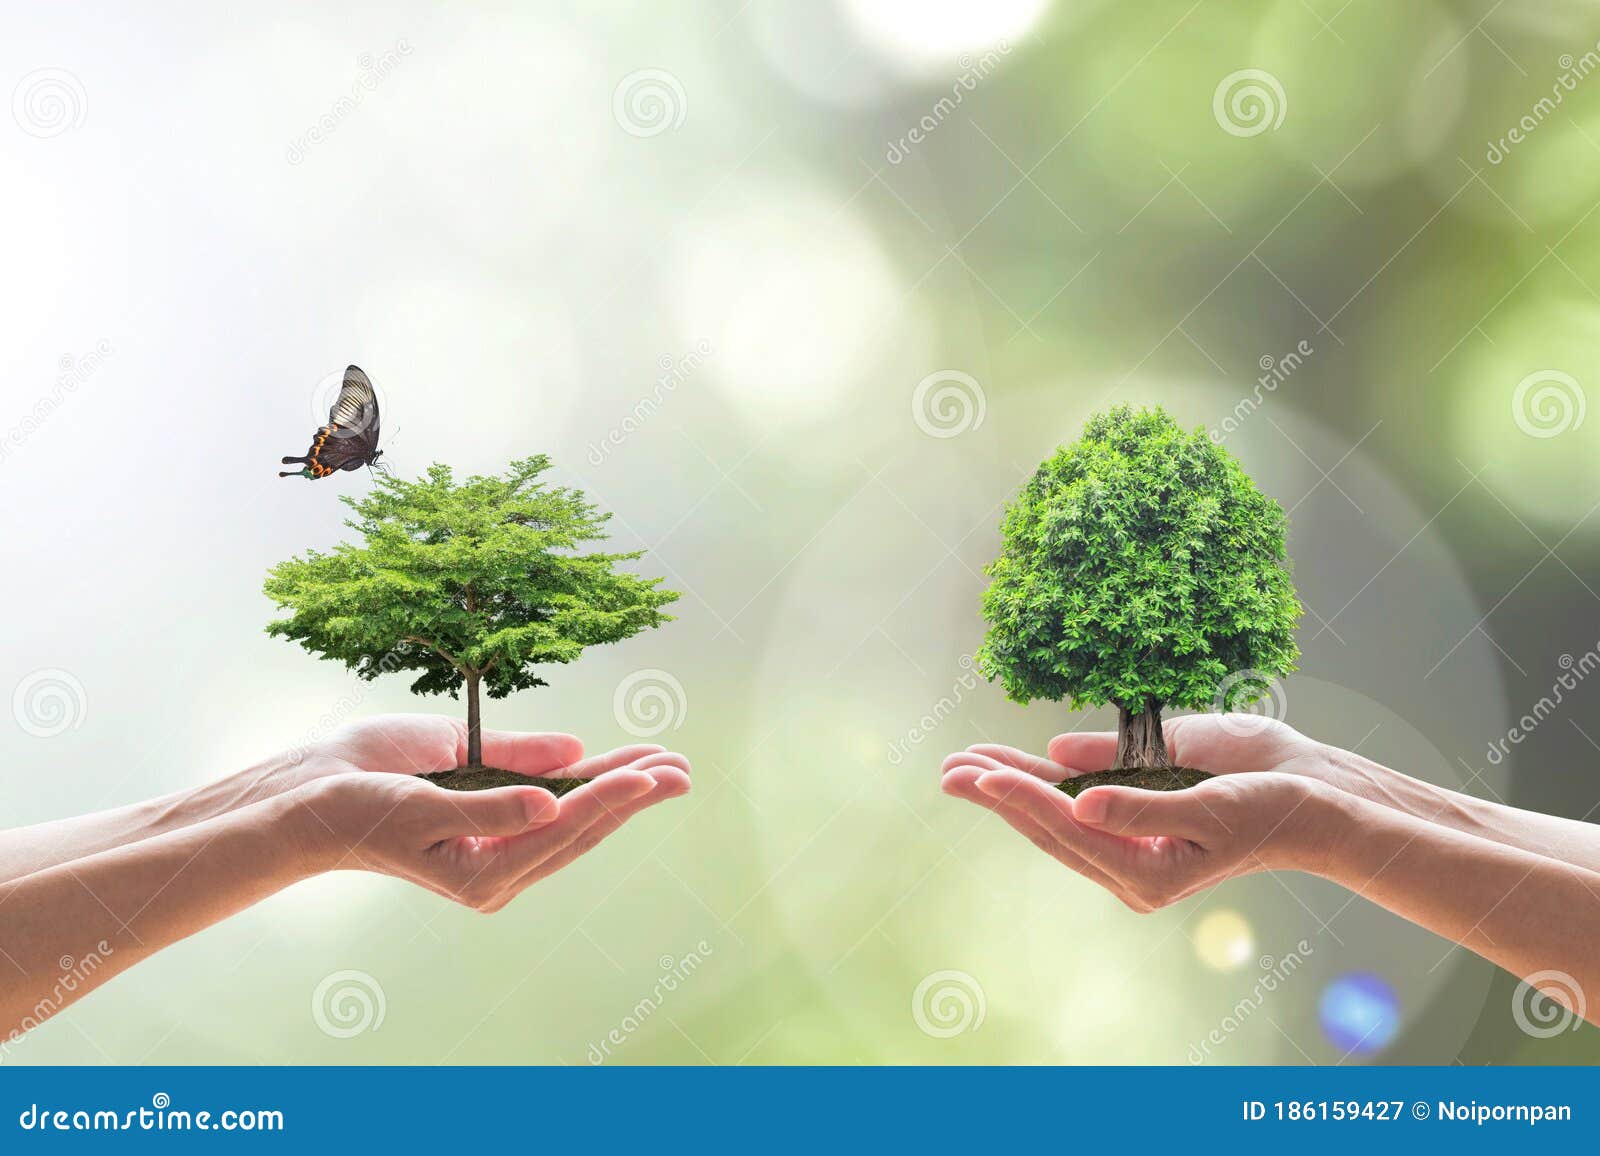 environmental biodiversity in ecosystem concept with bio diversity in species of tree planting and saving biological life